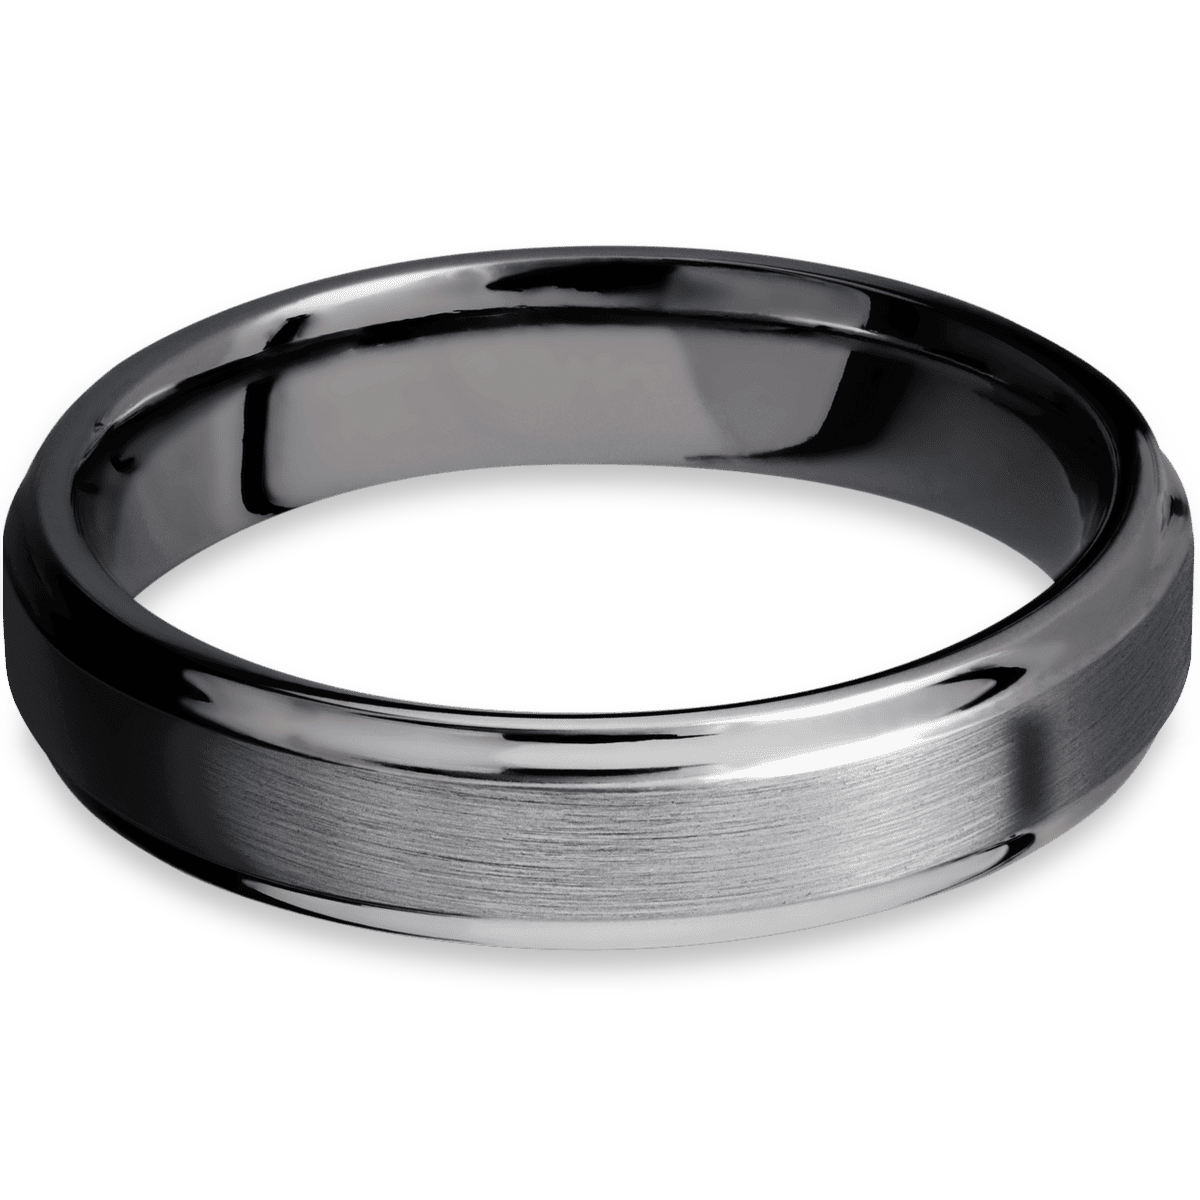 5mm wide flat grooved edges tantalum engagement ring with satin finish.